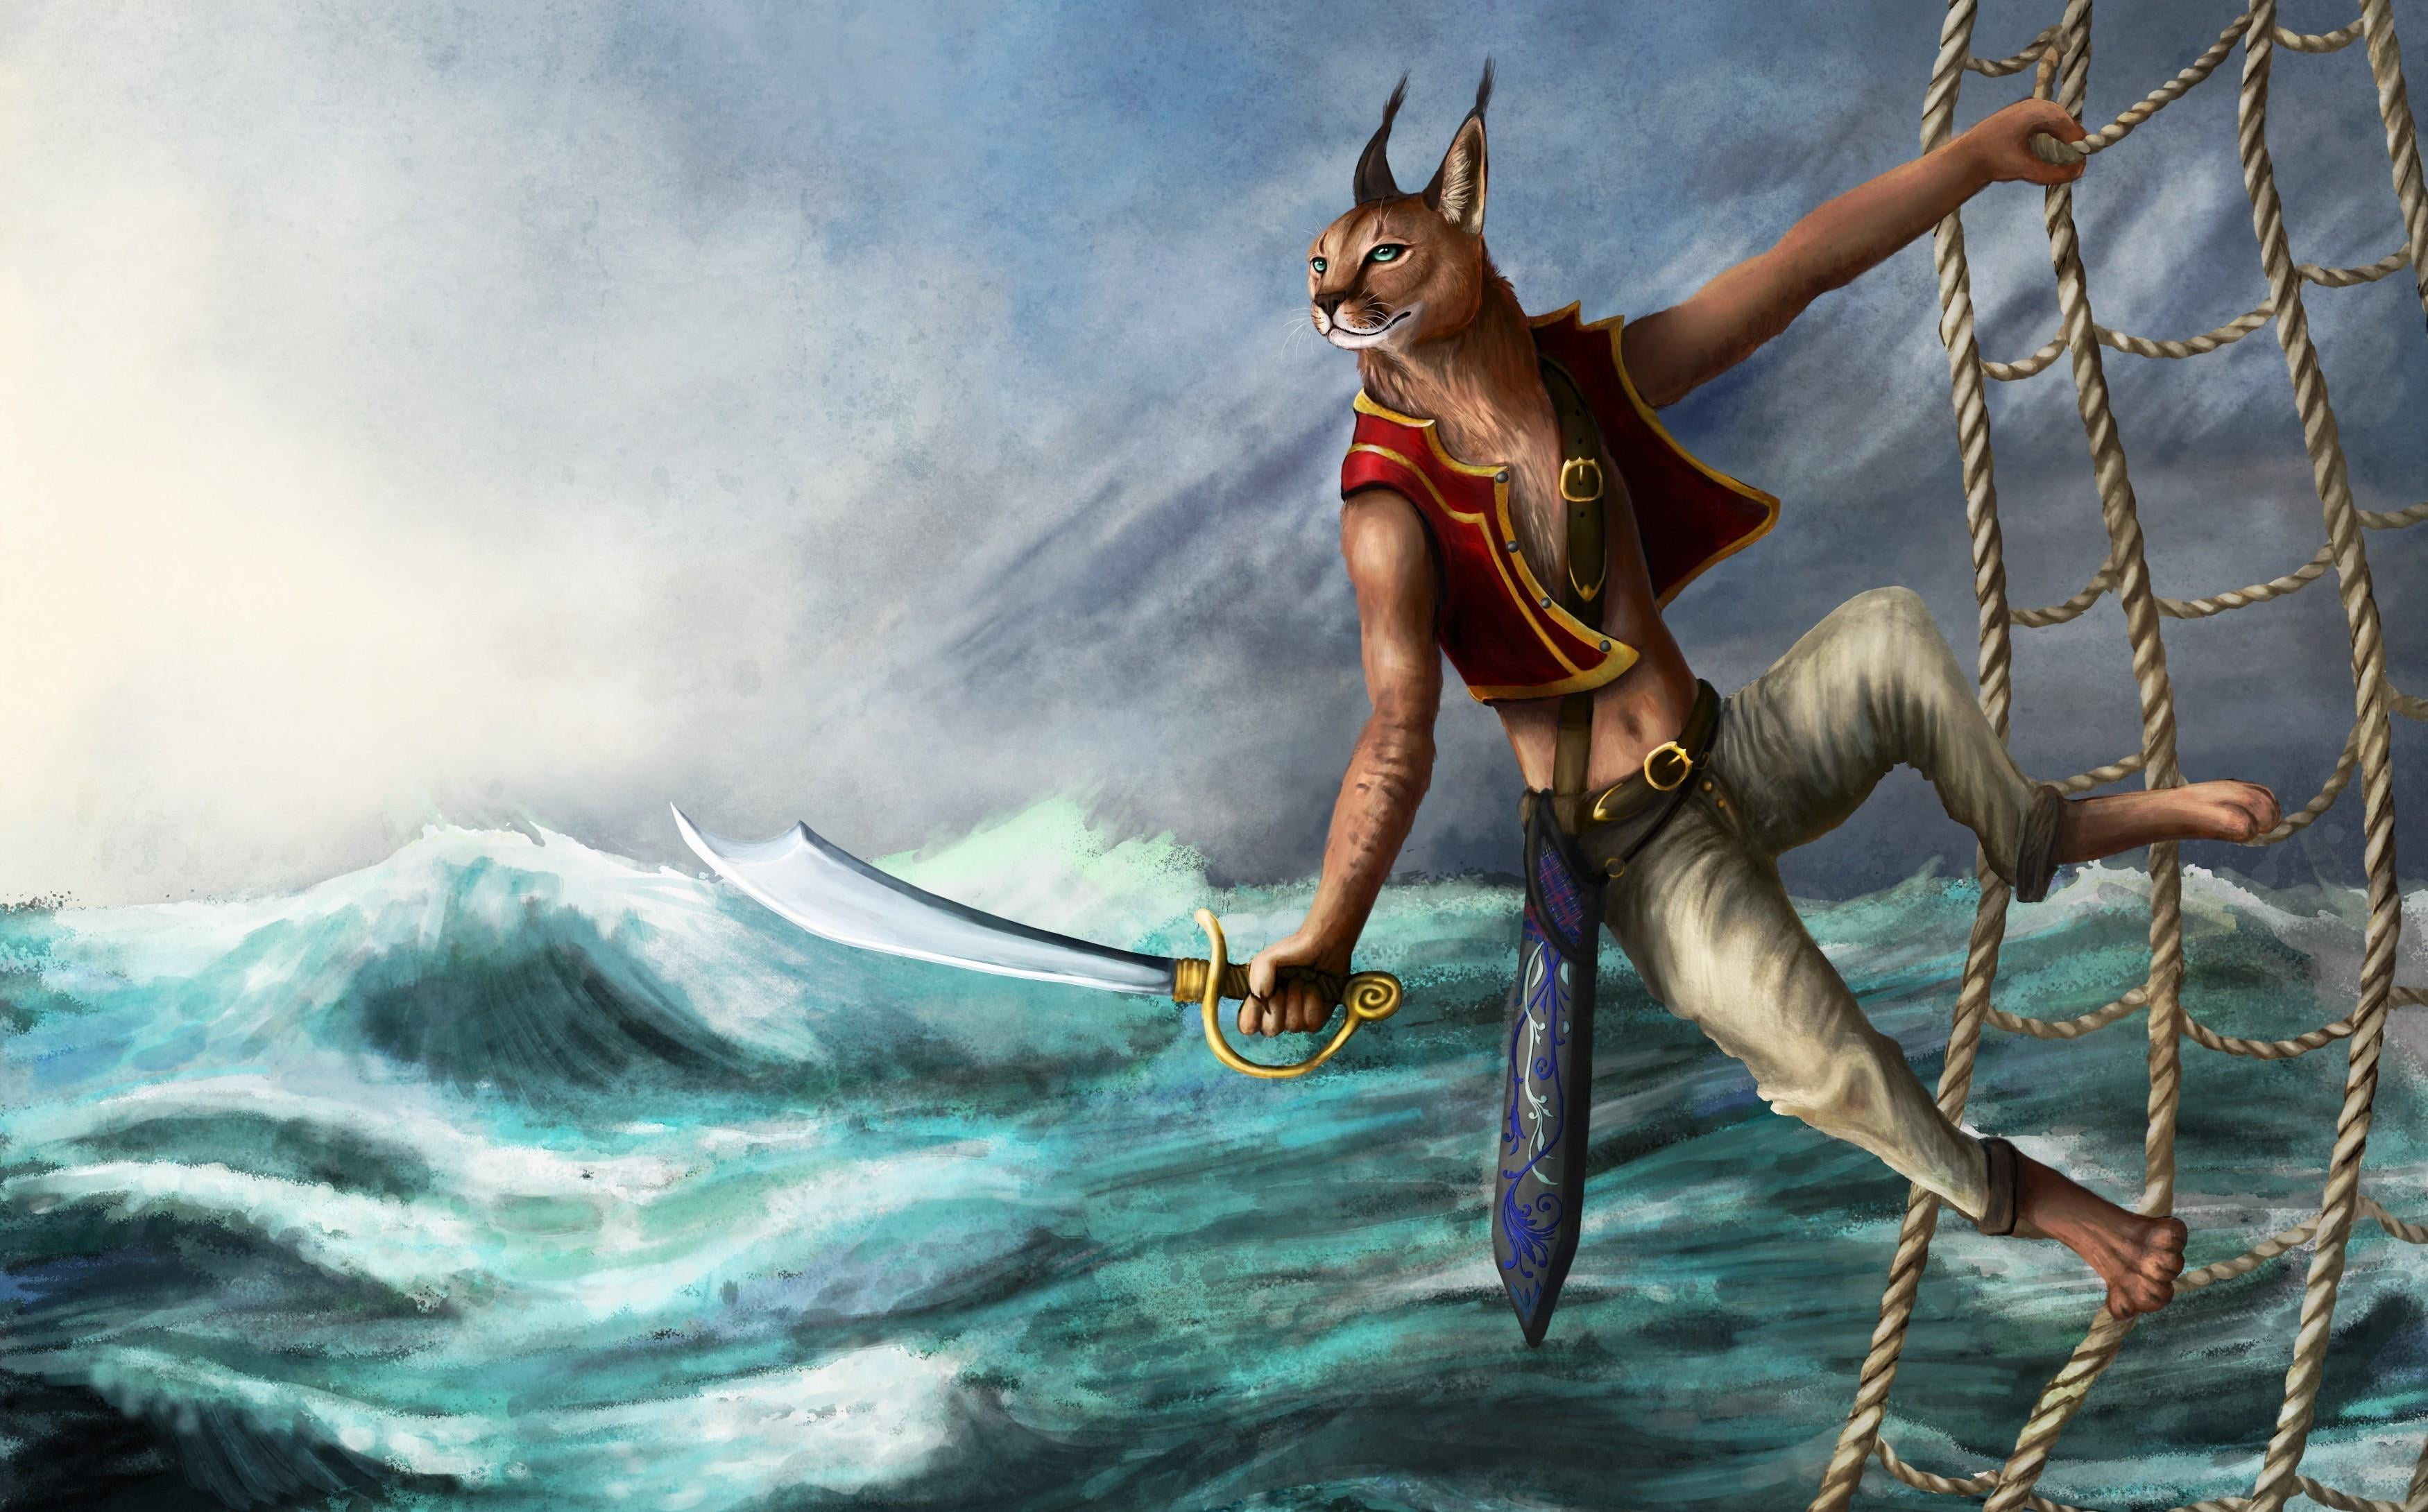 Fox Pirate Holding Cutlass While Hanging On Sailing Ship Rope With A View Of Ocean Waves Painting Hd Wallpaper Wallpaper Flare